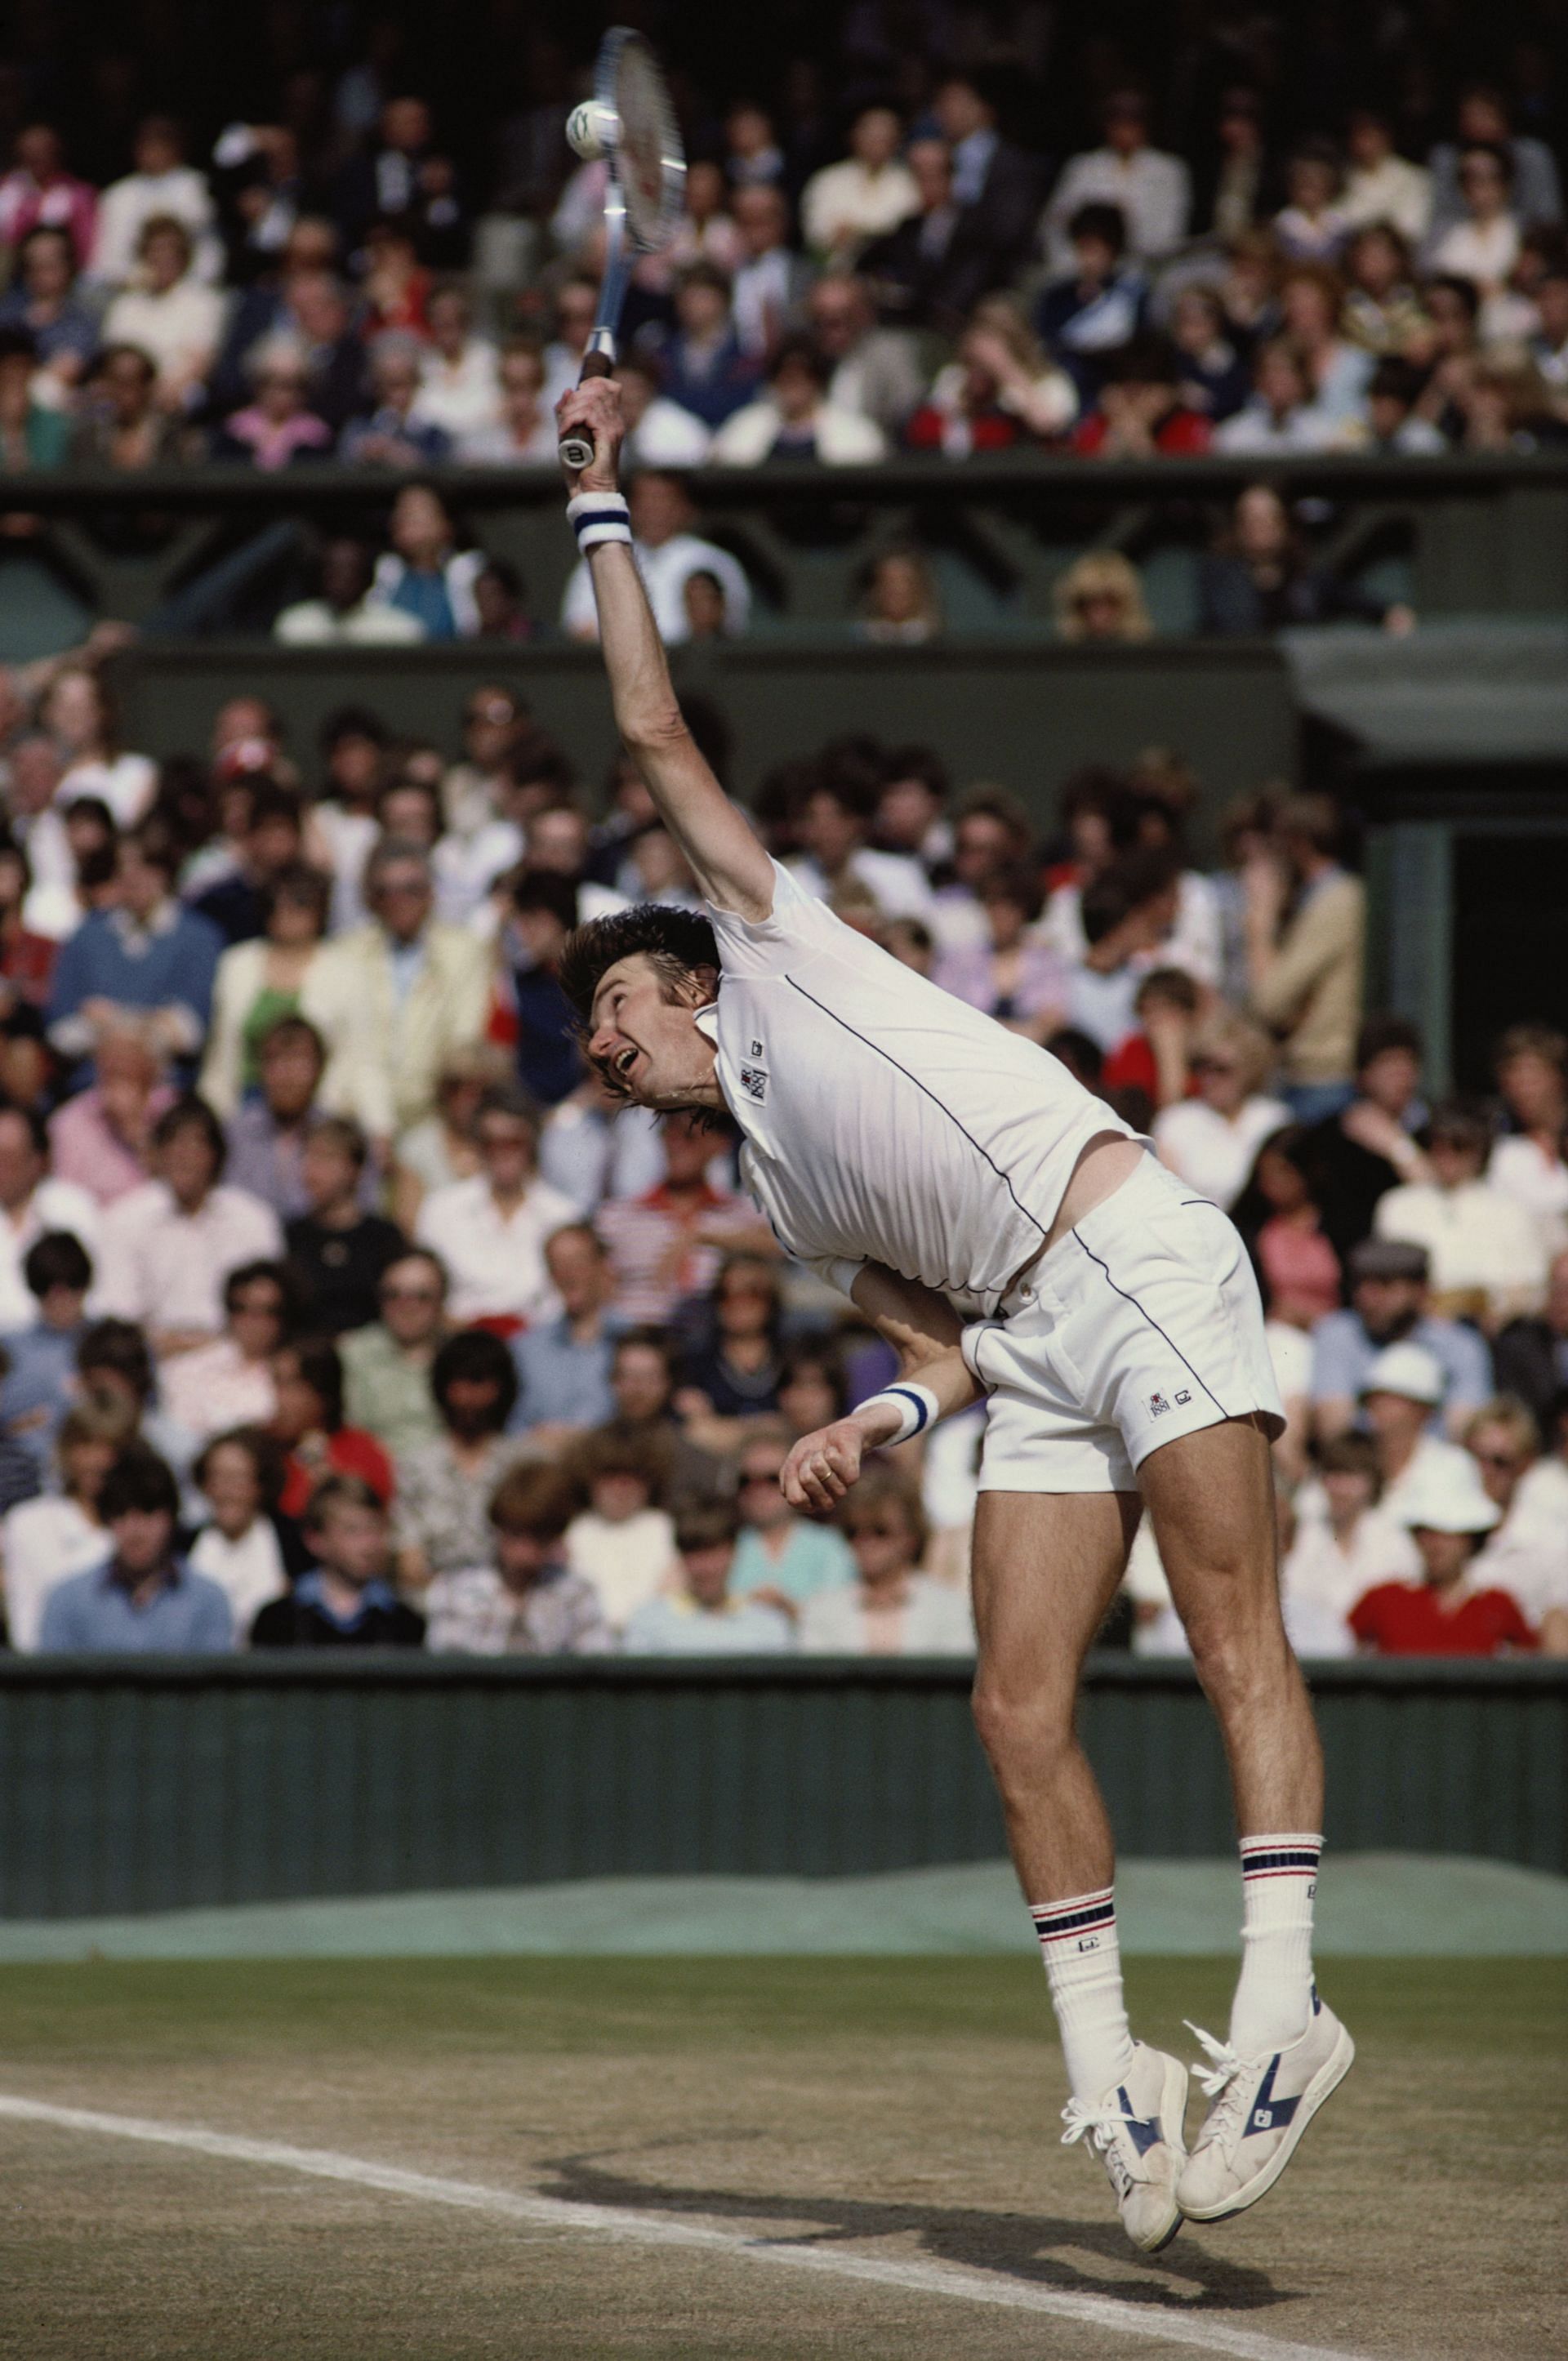 Jimmy Connors was declared the Joint Winner in 1981